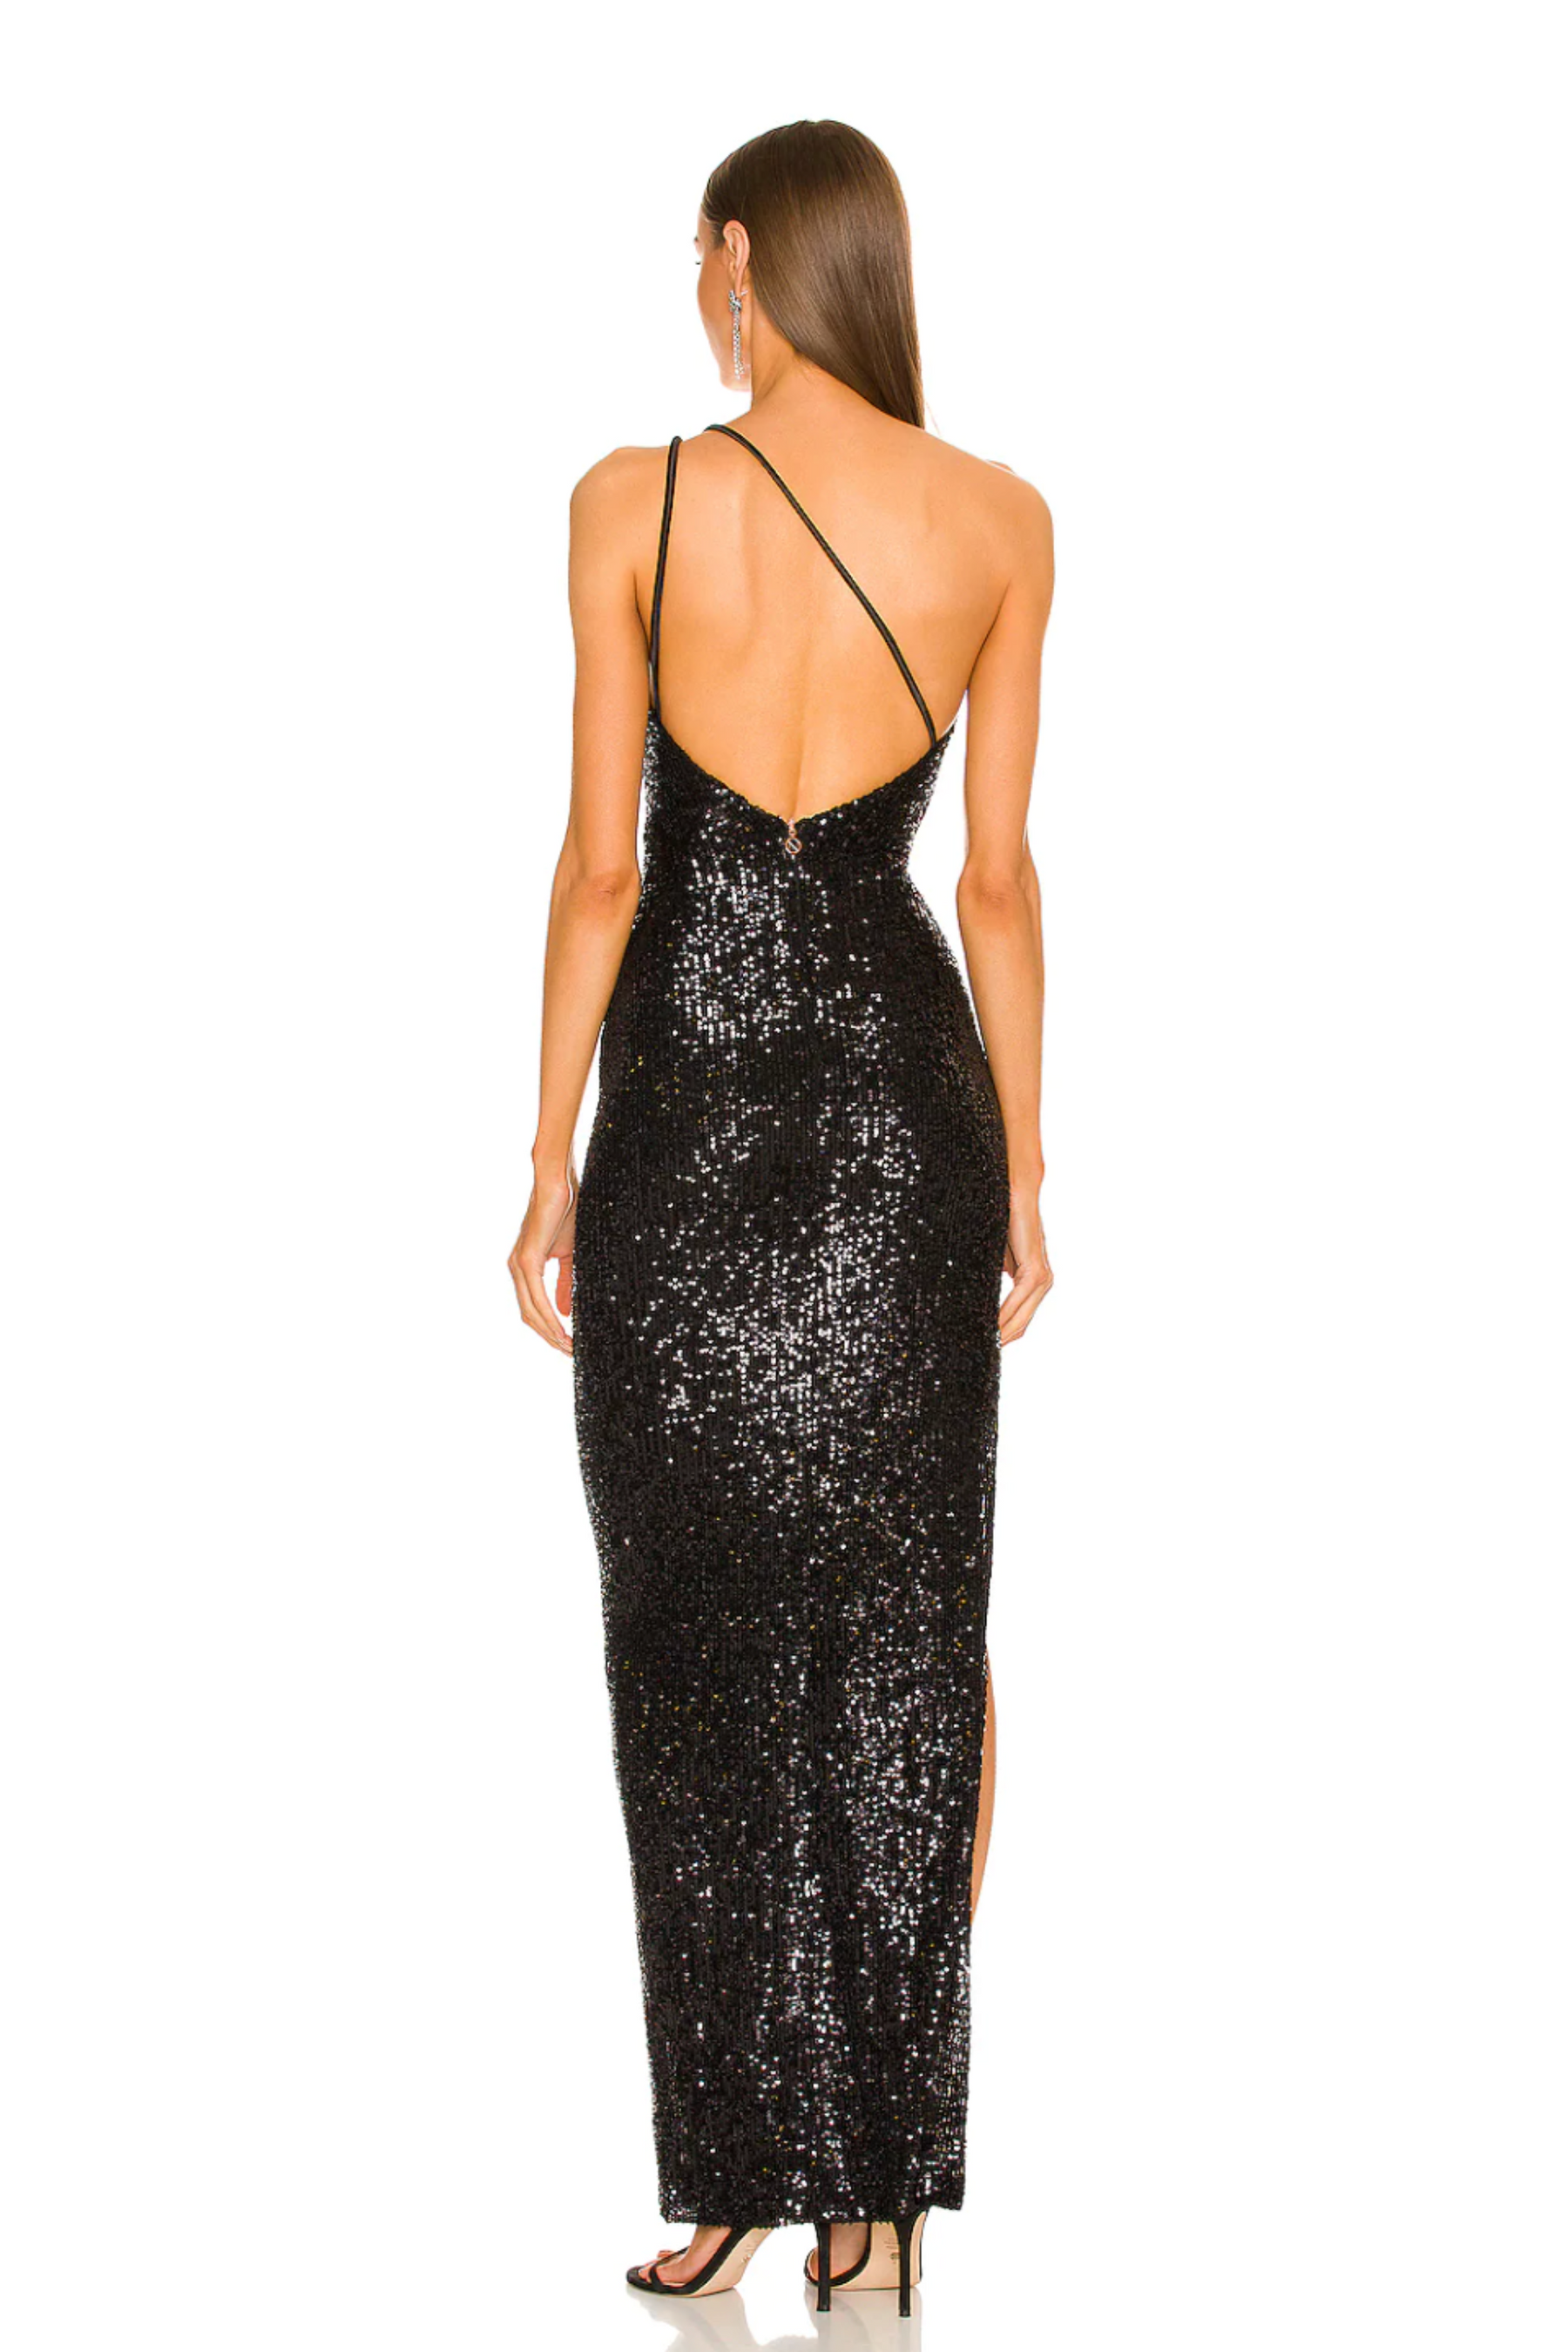 Leilani On Shoulder Gown in Black (S)